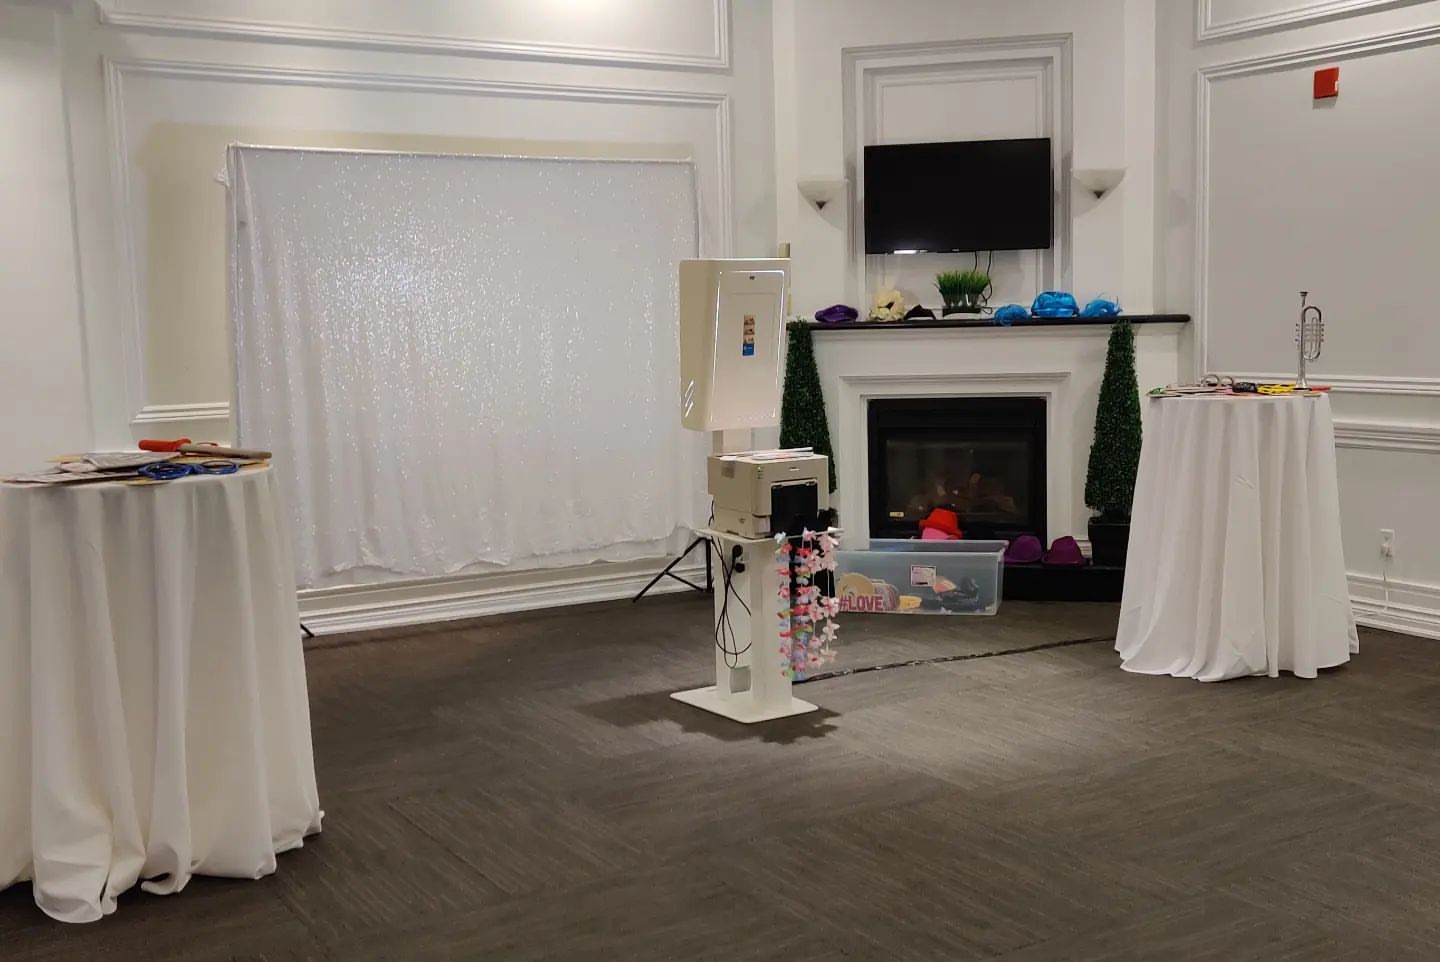 Photobooth setup at an elegant indoor venue with a white sparkling backdrop, prop table, and photobooth equipment including a kiosk and printer, ready for guests to capture fun moments, provided by Rent a PhotoBooth photobooth rentals.